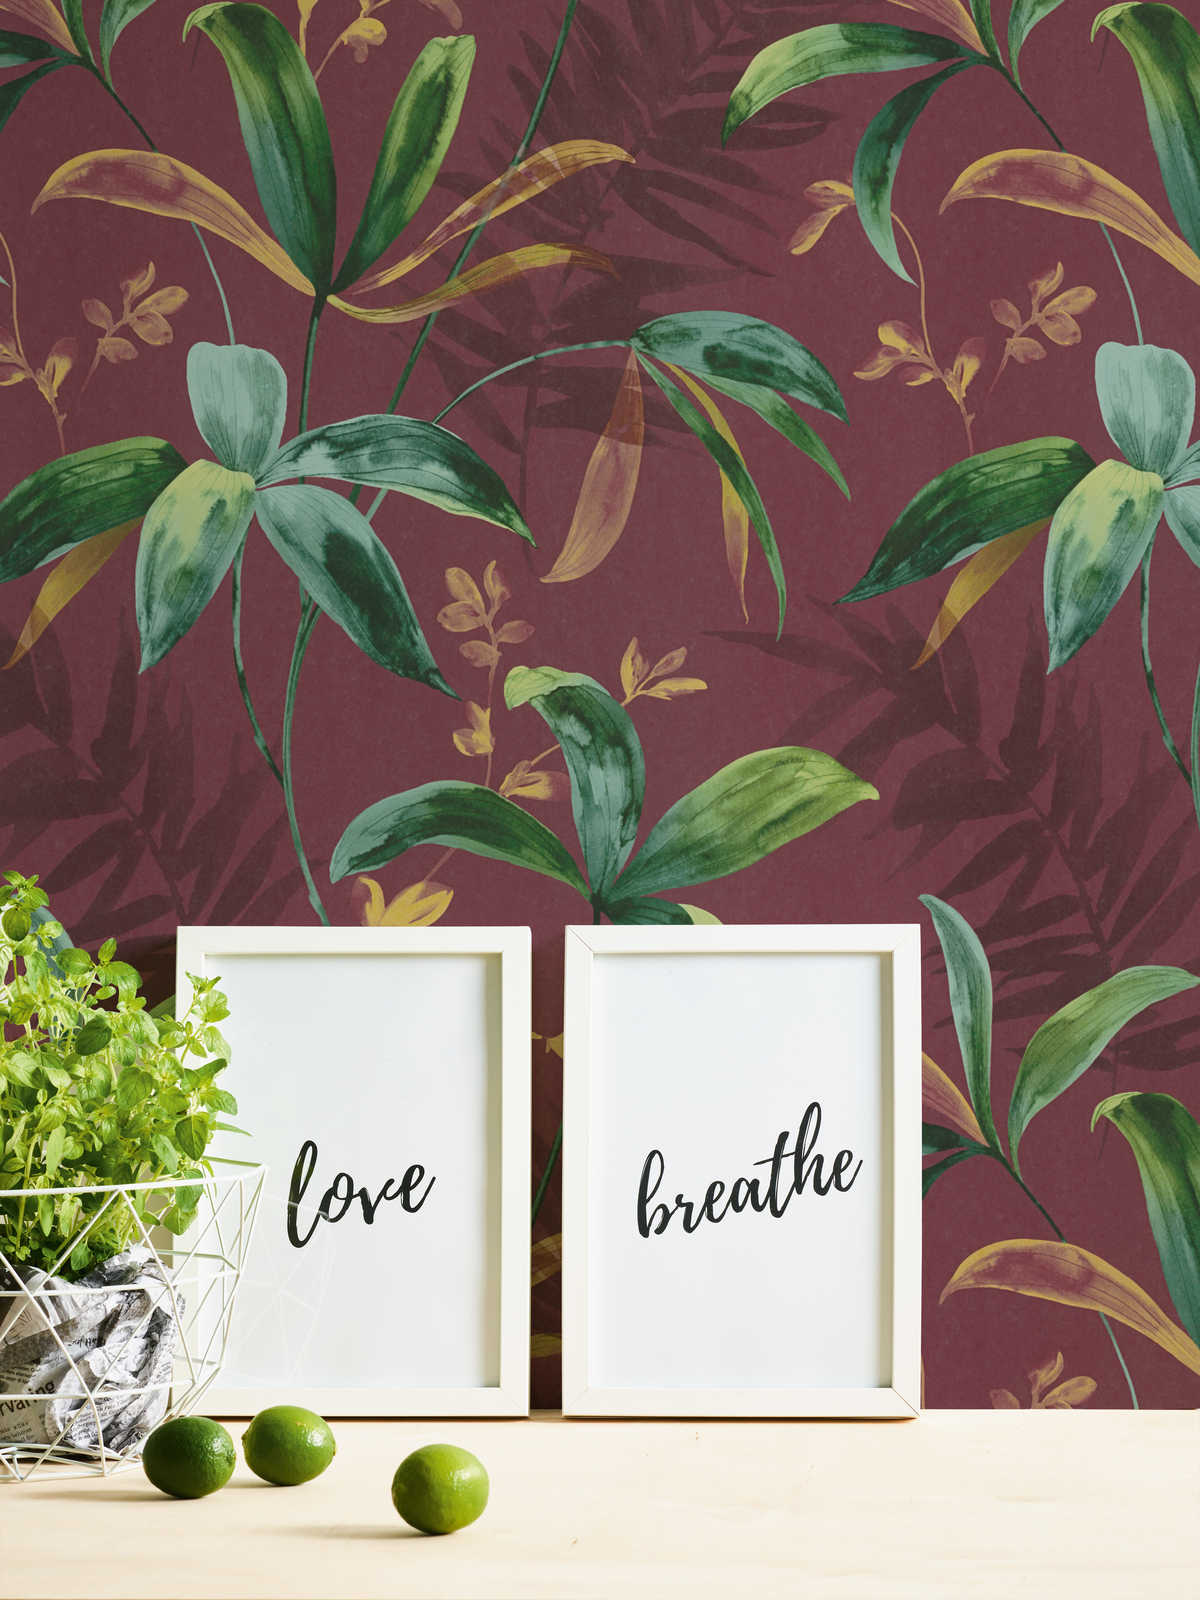             Dark red wallpaper with green leaves in watercolour style - red, green, yellow
        